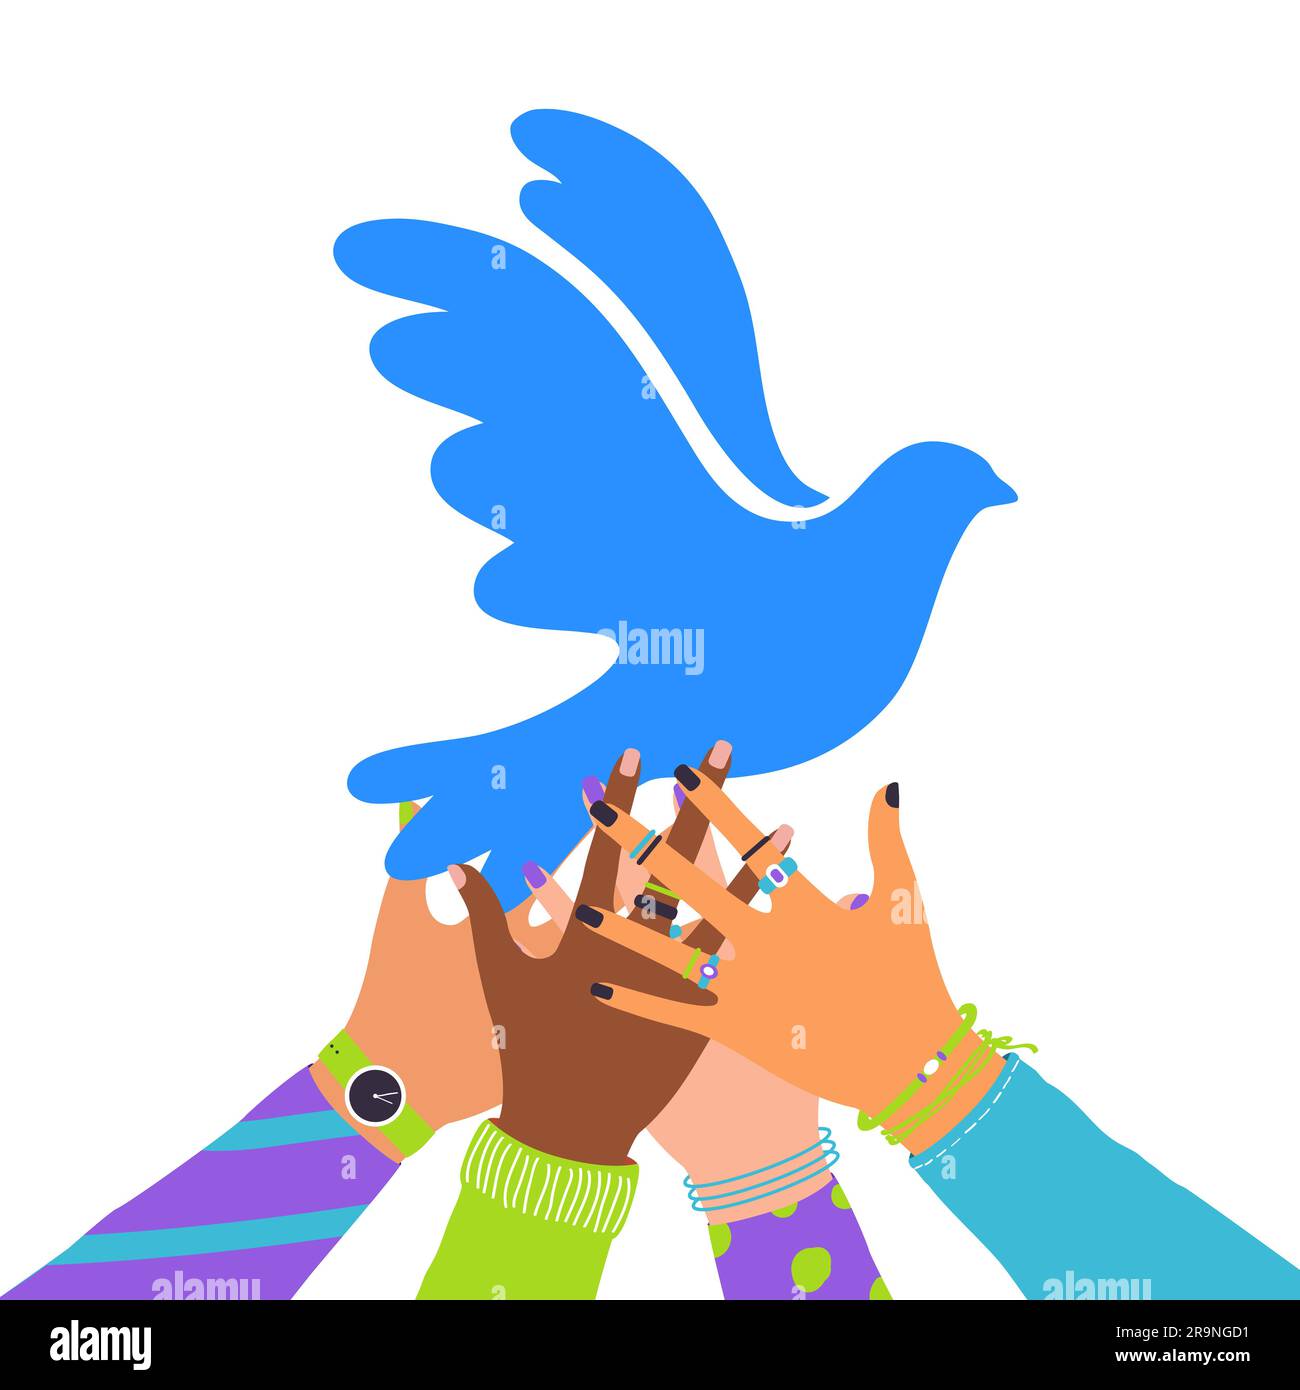 Vector illustration of human hands holding flying bird dove as a symbol of peace isolated on white background. International Peace Day Stock Vector